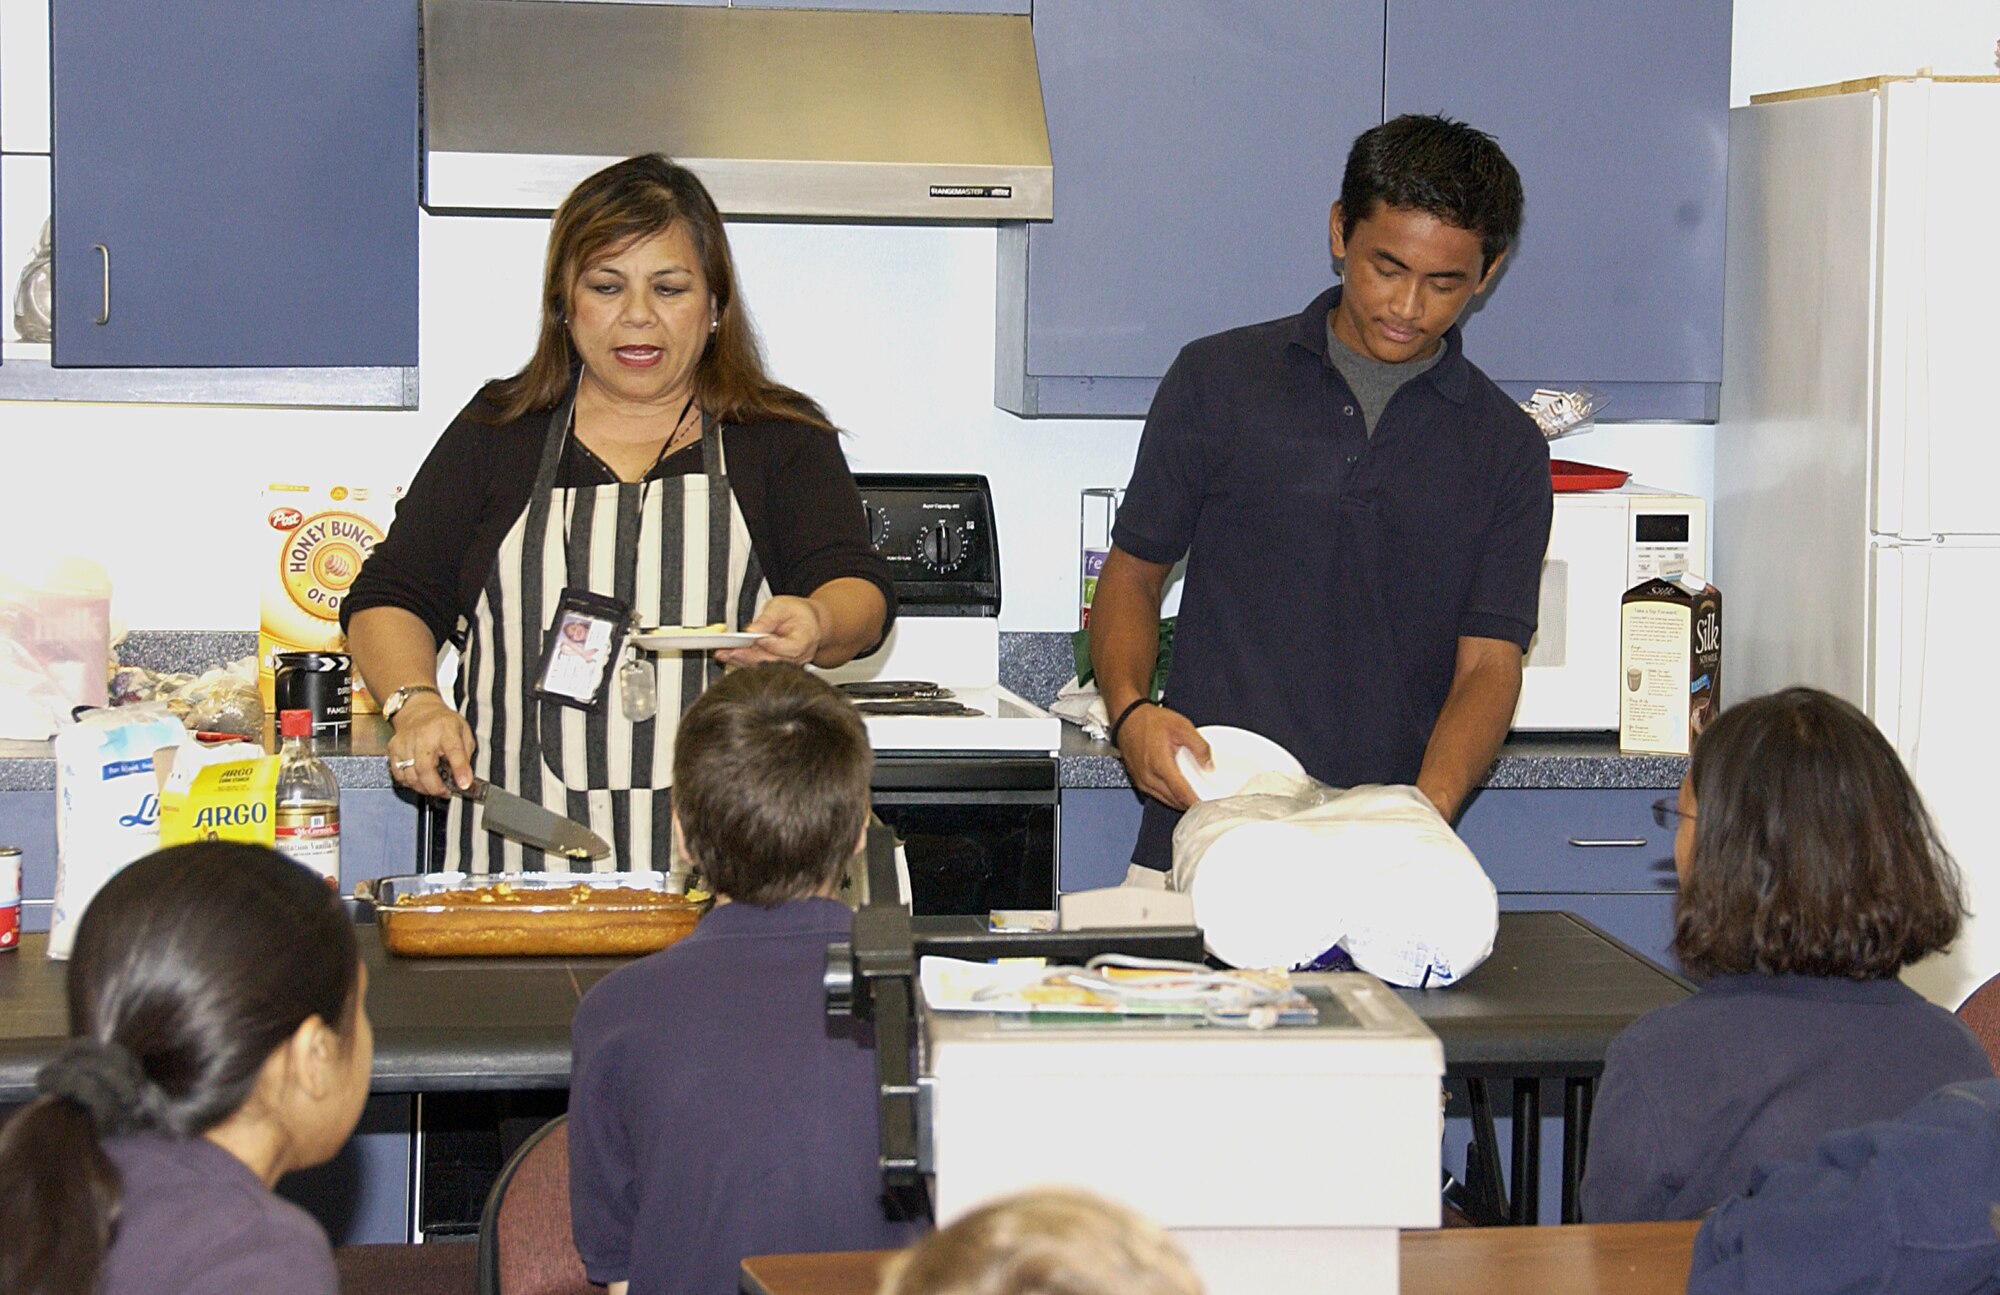 ANDERSEN AIR FORCE BASE, Guam -- Donovan Alger, an eighth grade student at Andersen Middle School, helps his Chamorro Culture Class teacher, Elizabeth Cruz put on a cooking demonstration for her sixth grade class March 19. Donovan was chosen as Andersen Middle School's Star Student due to his dedication to the classroom, his conduct within the classroom and his volunteer efforts. (U.S. Air Force photo by Airman Carissa Wolff)                             